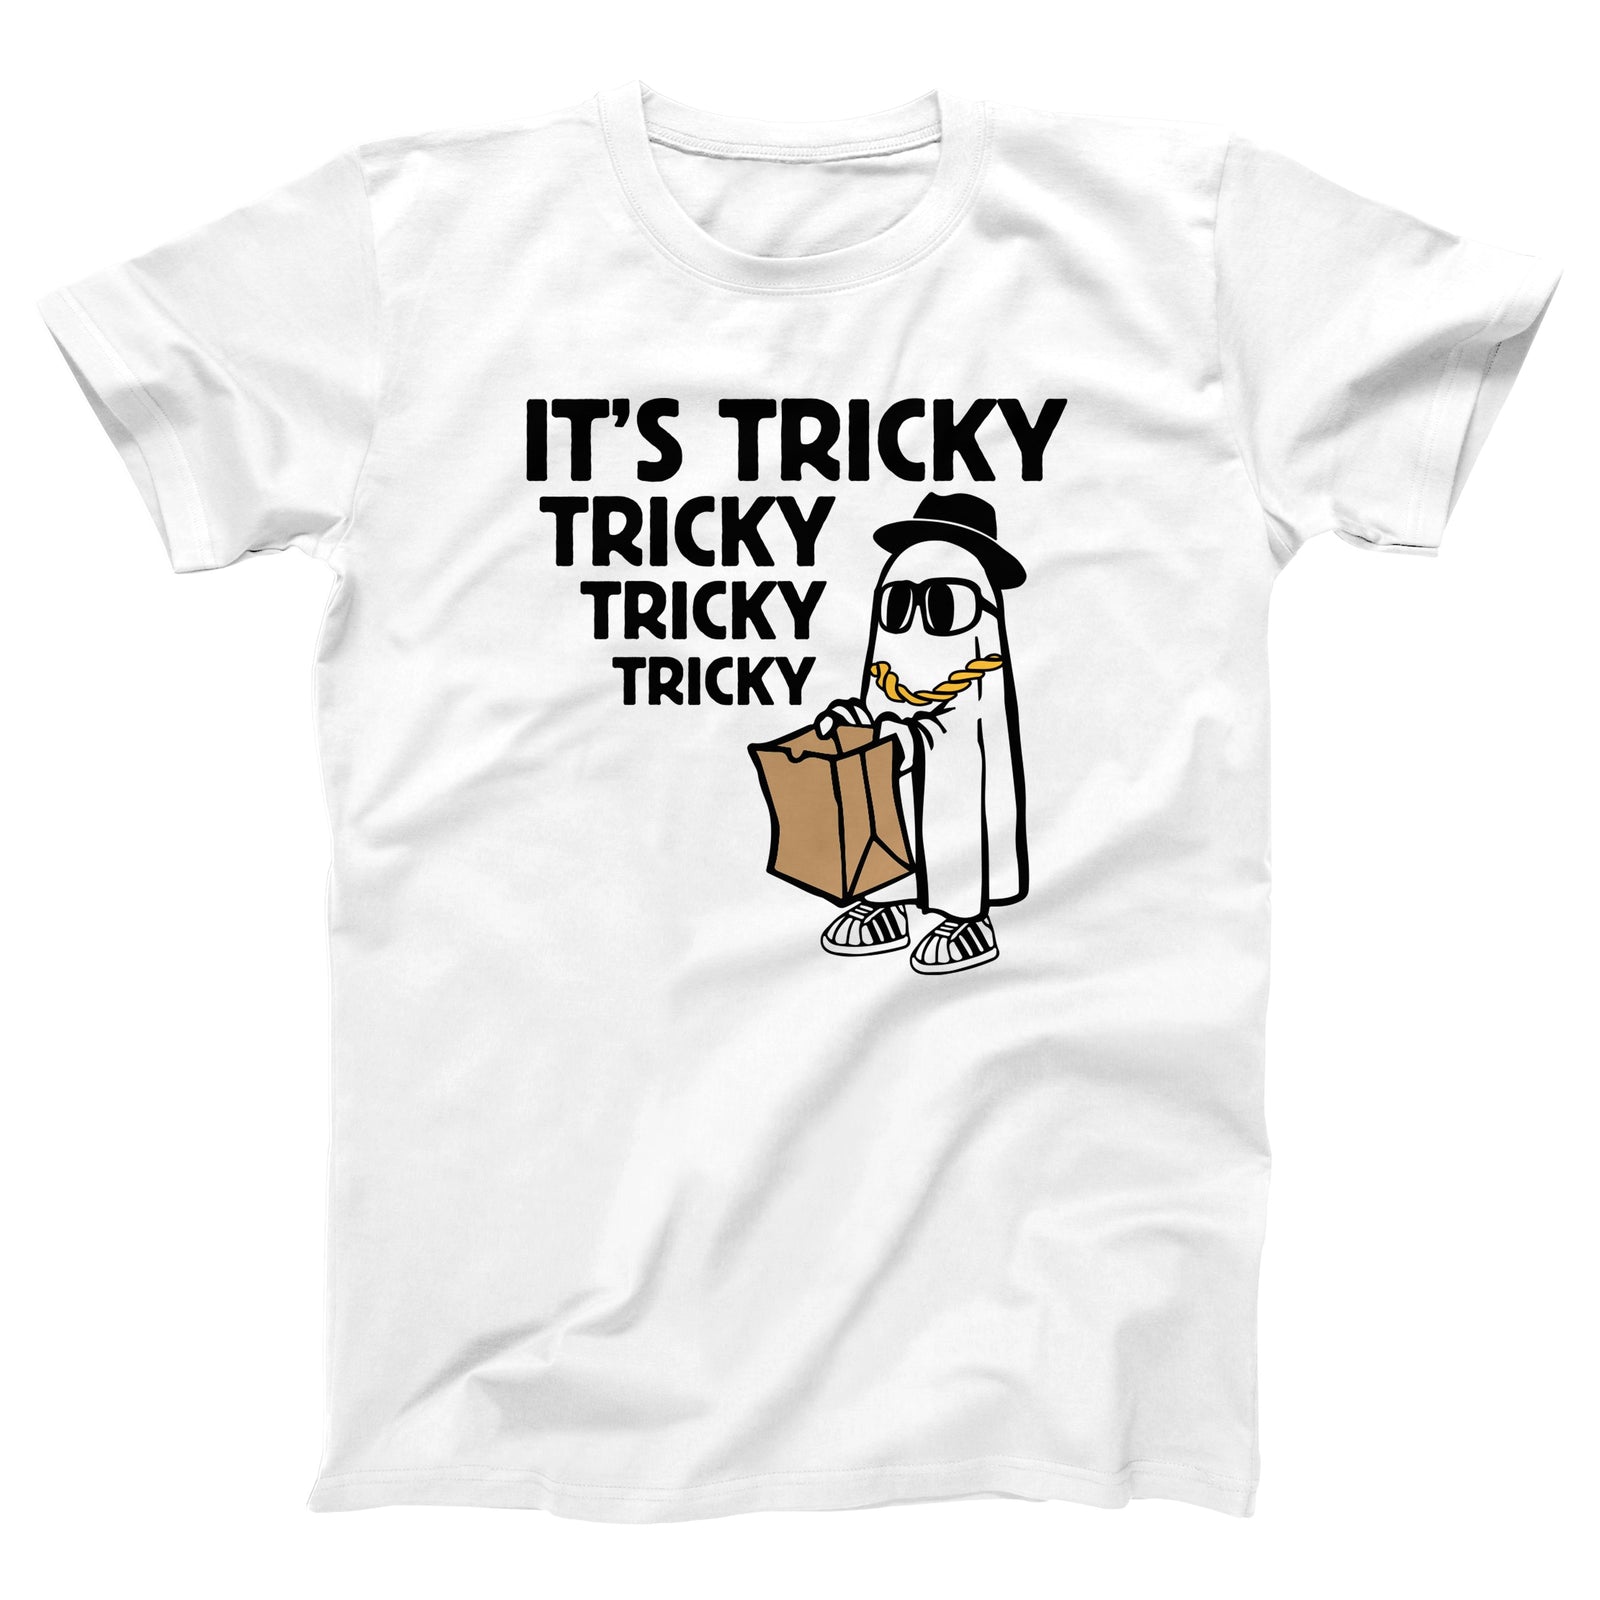 //cdn.shopify.com/s/files/1/0274/2488/2766/products/its-tricky-menunisex-t-shirt-520440_5000x.jpg?v=1662711466 5000w,
    //cdn.shopify.com/s/files/1/0274/2488/2766/products/its-tricky-menunisex-t-shirt-520440_4500x.jpg?v=1662711466 4500w,
    //cdn.shopify.com/s/files/1/0274/2488/2766/products/its-tricky-menunisex-t-shirt-520440_4000x.jpg?v=1662711466 4000w,
    //cdn.shopify.com/s/files/1/0274/2488/2766/products/its-tricky-menunisex-t-shirt-520440_3500x.jpg?v=1662711466 3500w,
    //cdn.shopify.com/s/files/1/0274/2488/2766/products/its-tricky-menunisex-t-shirt-520440_3000x.jpg?v=1662711466 3000w,
    //cdn.shopify.com/s/files/1/0274/2488/2766/products/its-tricky-menunisex-t-shirt-520440_2500x.jpg?v=1662711466 2500w,
    //cdn.shopify.com/s/files/1/0274/2488/2766/products/its-tricky-menunisex-t-shirt-520440_2000x.jpg?v=1662711466 2000w,
    //cdn.shopify.com/s/files/1/0274/2488/2766/products/its-tricky-menunisex-t-shirt-520440_1800x.jpg?v=1662711466 1800w,
    //cdn.shopify.com/s/files/1/0274/2488/2766/products/its-tricky-menunisex-t-shirt-520440_1600x.jpg?v=1662711466 1600w,
    //cdn.shopify.com/s/files/1/0274/2488/2766/products/its-tricky-menunisex-t-shirt-520440_1400x.jpg?v=1662711466 1400w,
    //cdn.shopify.com/s/files/1/0274/2488/2766/products/its-tricky-menunisex-t-shirt-520440_1200x.jpg?v=1662711466 1200w,
    //cdn.shopify.com/s/files/1/0274/2488/2766/products/its-tricky-menunisex-t-shirt-520440_1000x.jpg?v=1662711466 1000w,
    //cdn.shopify.com/s/files/1/0274/2488/2766/products/its-tricky-menunisex-t-shirt-520440_800x.jpg?v=1662711466 800w,
    //cdn.shopify.com/s/files/1/0274/2488/2766/products/its-tricky-menunisex-t-shirt-520440_600x.jpg?v=1662711466 600w,
    //cdn.shopify.com/s/files/1/0274/2488/2766/products/its-tricky-menunisex-t-shirt-520440_400x.jpg?v=1662711466 400w,
    //cdn.shopify.com/s/files/1/0274/2488/2766/products/its-tricky-menunisex-t-shirt-520440_200x.jpg?v=1662711466 200w